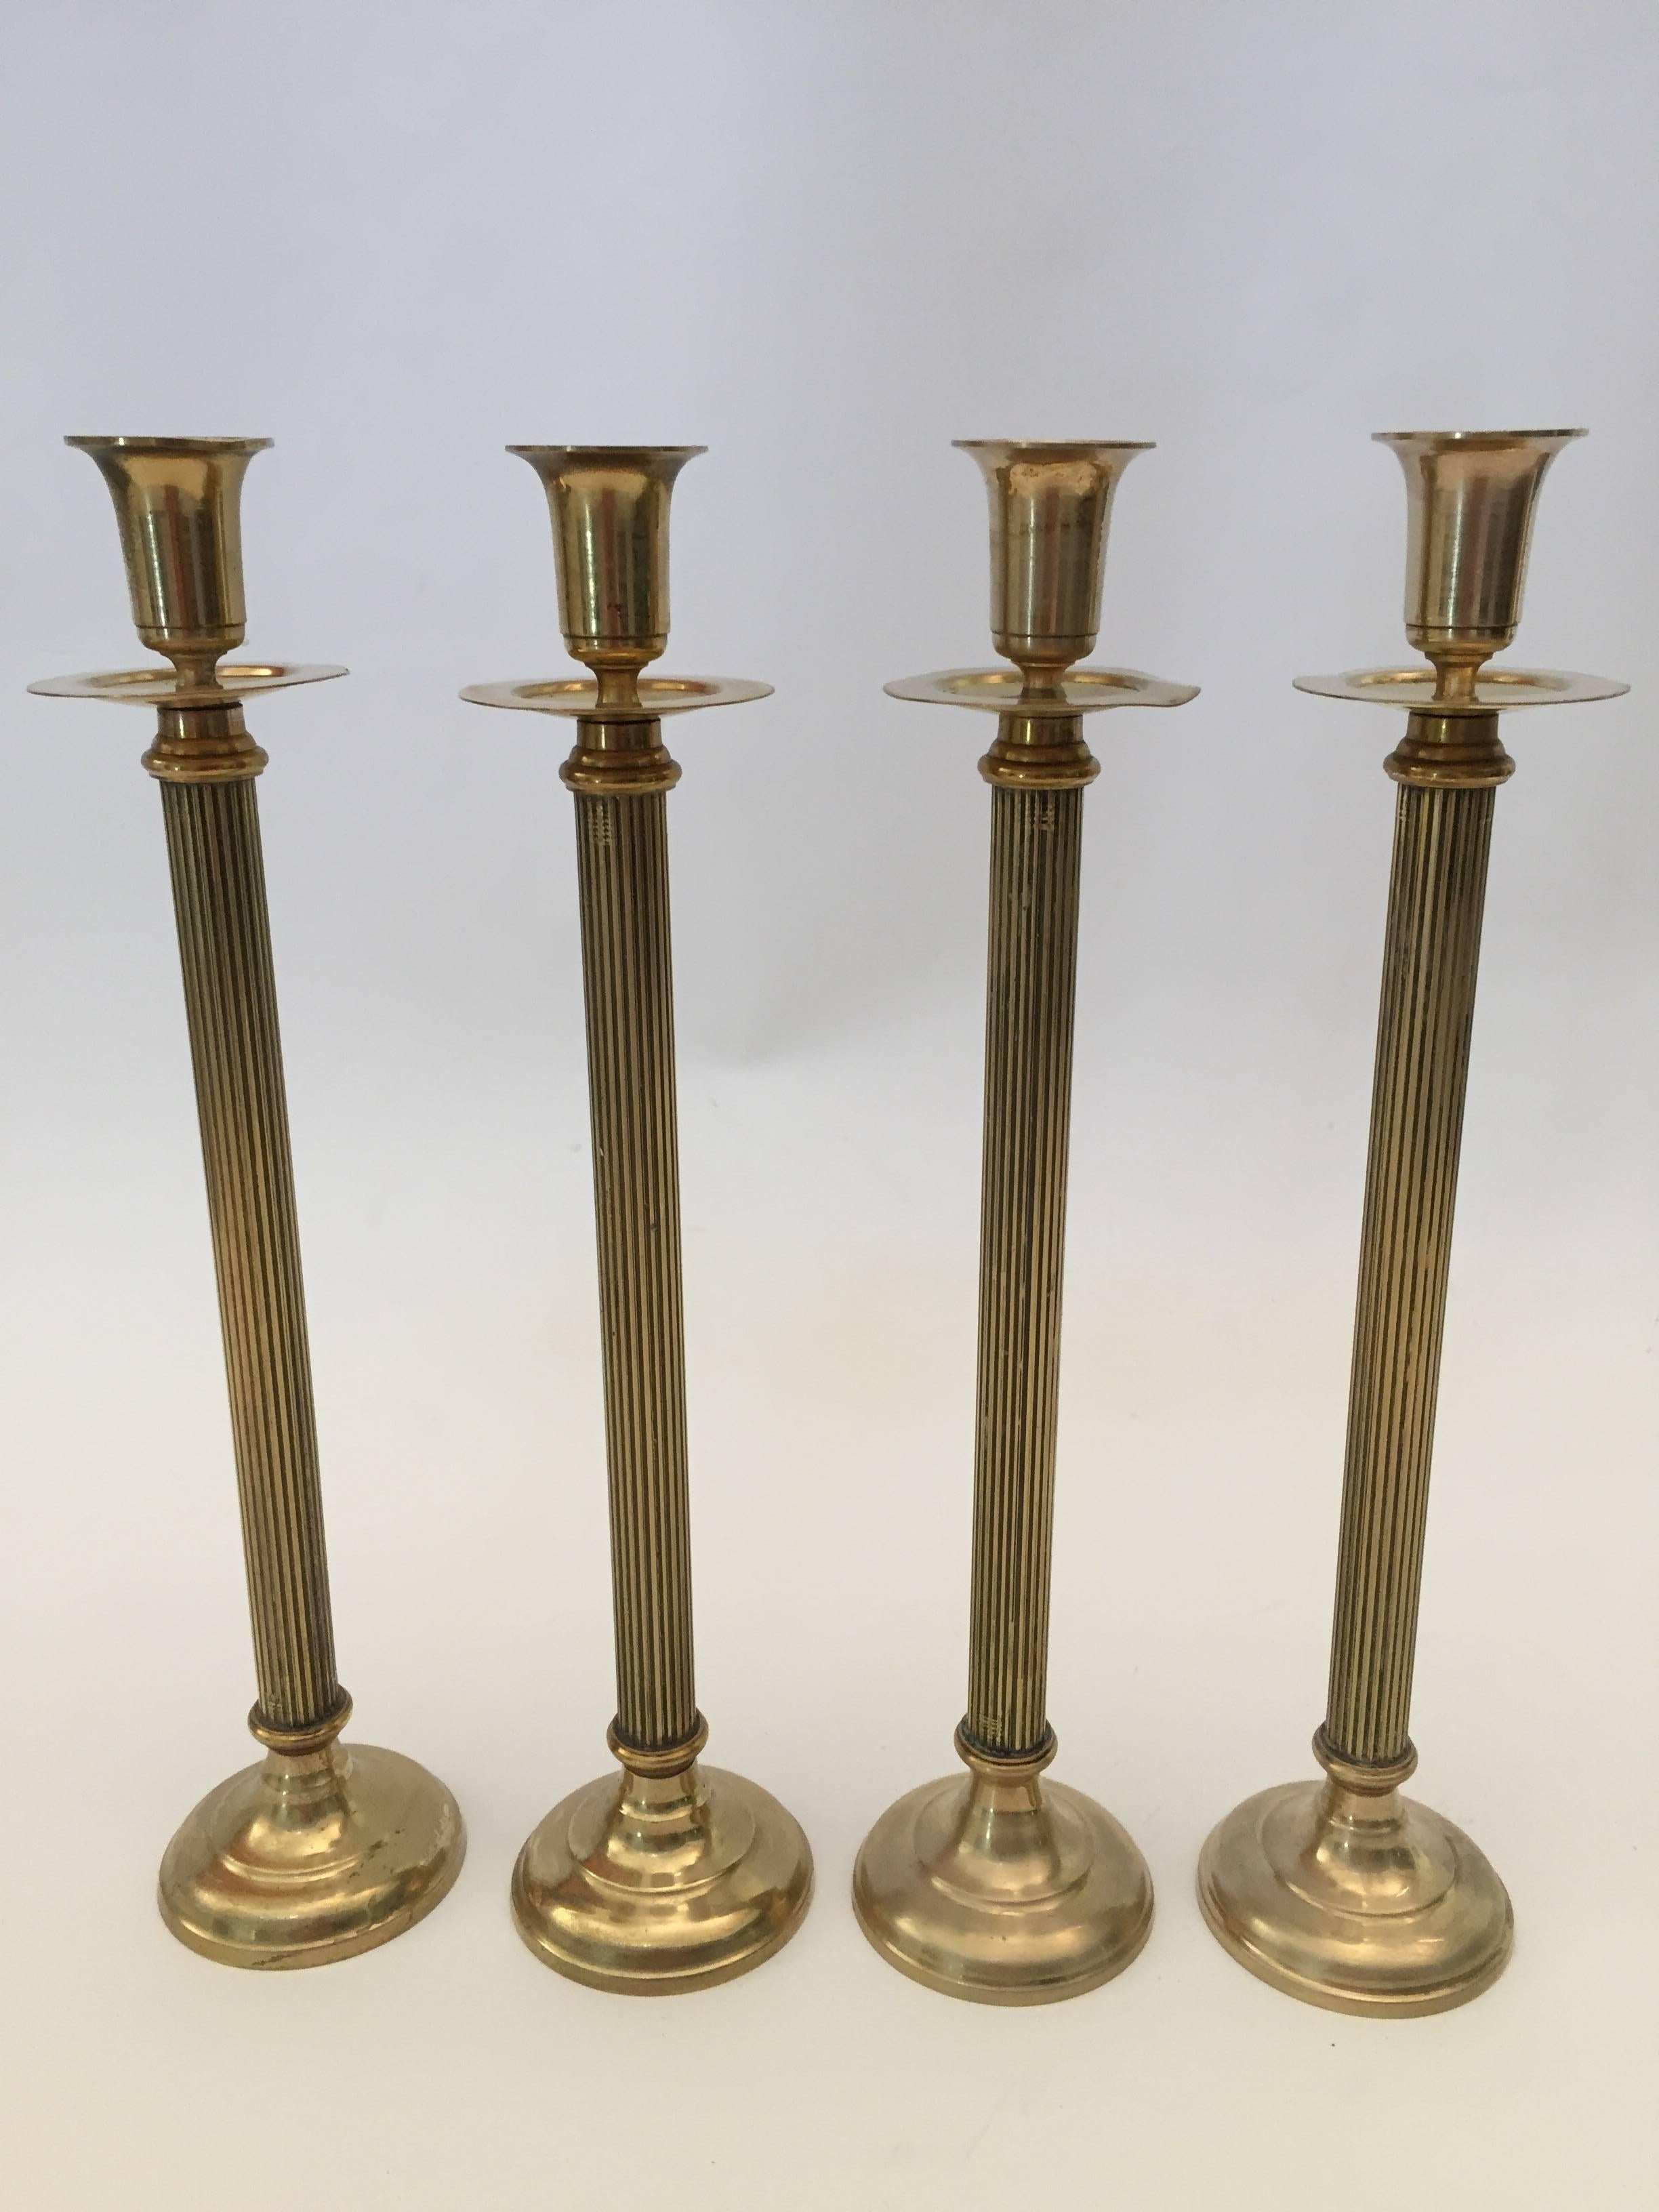 Set of four Victorian brass candlesticks.
Round base. Drip pan near sockets.
Measures: Height 13.5”, base 3”.